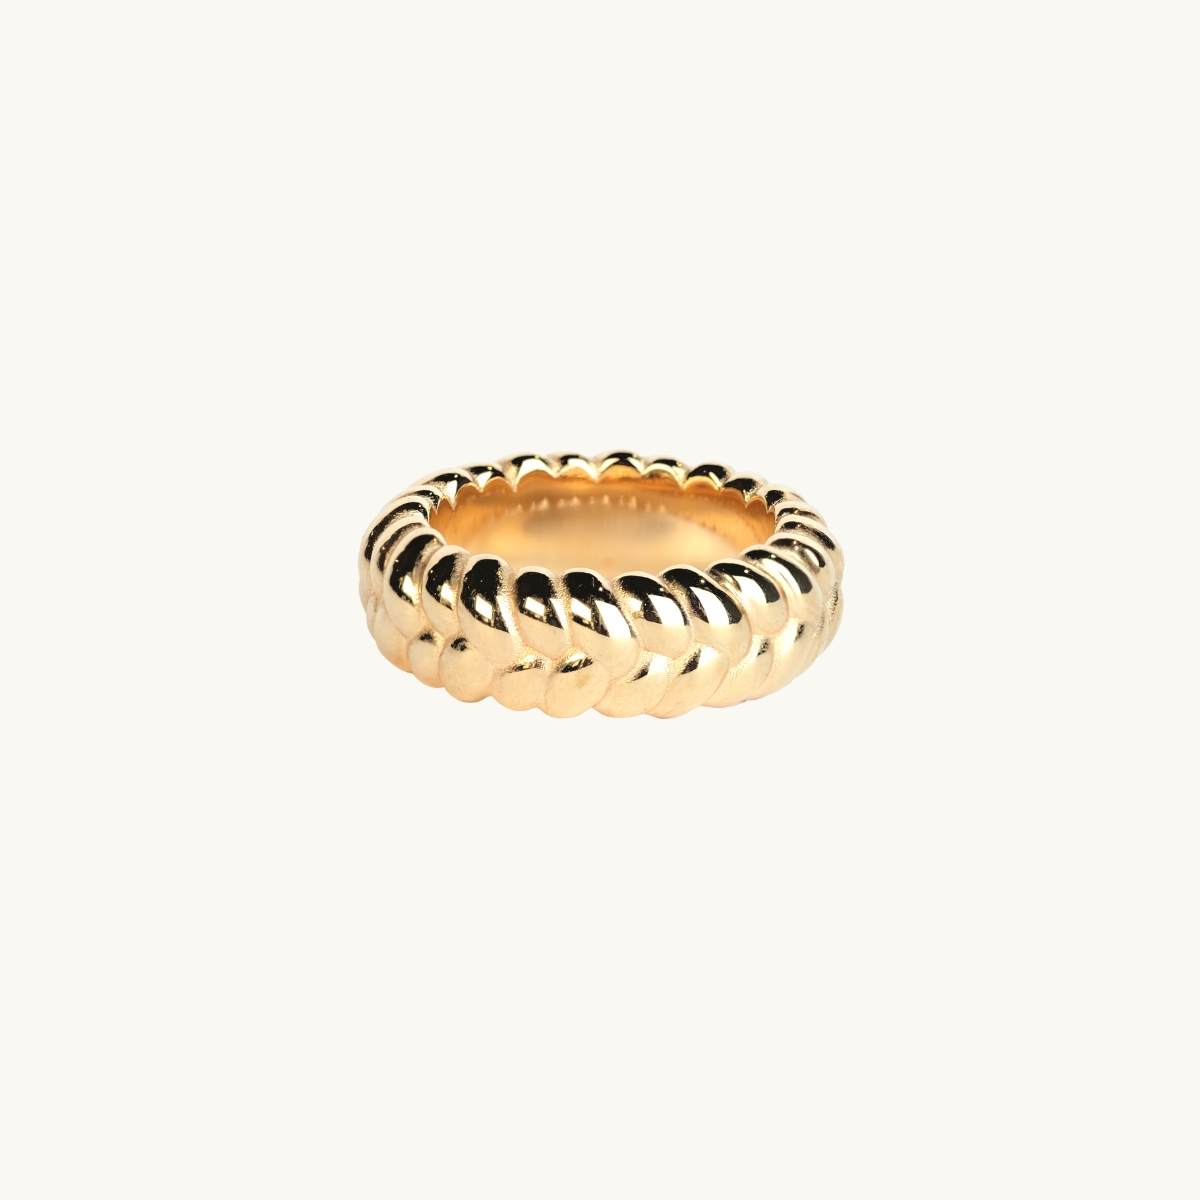 a ring in 18k goldplated brass with a braided pattern